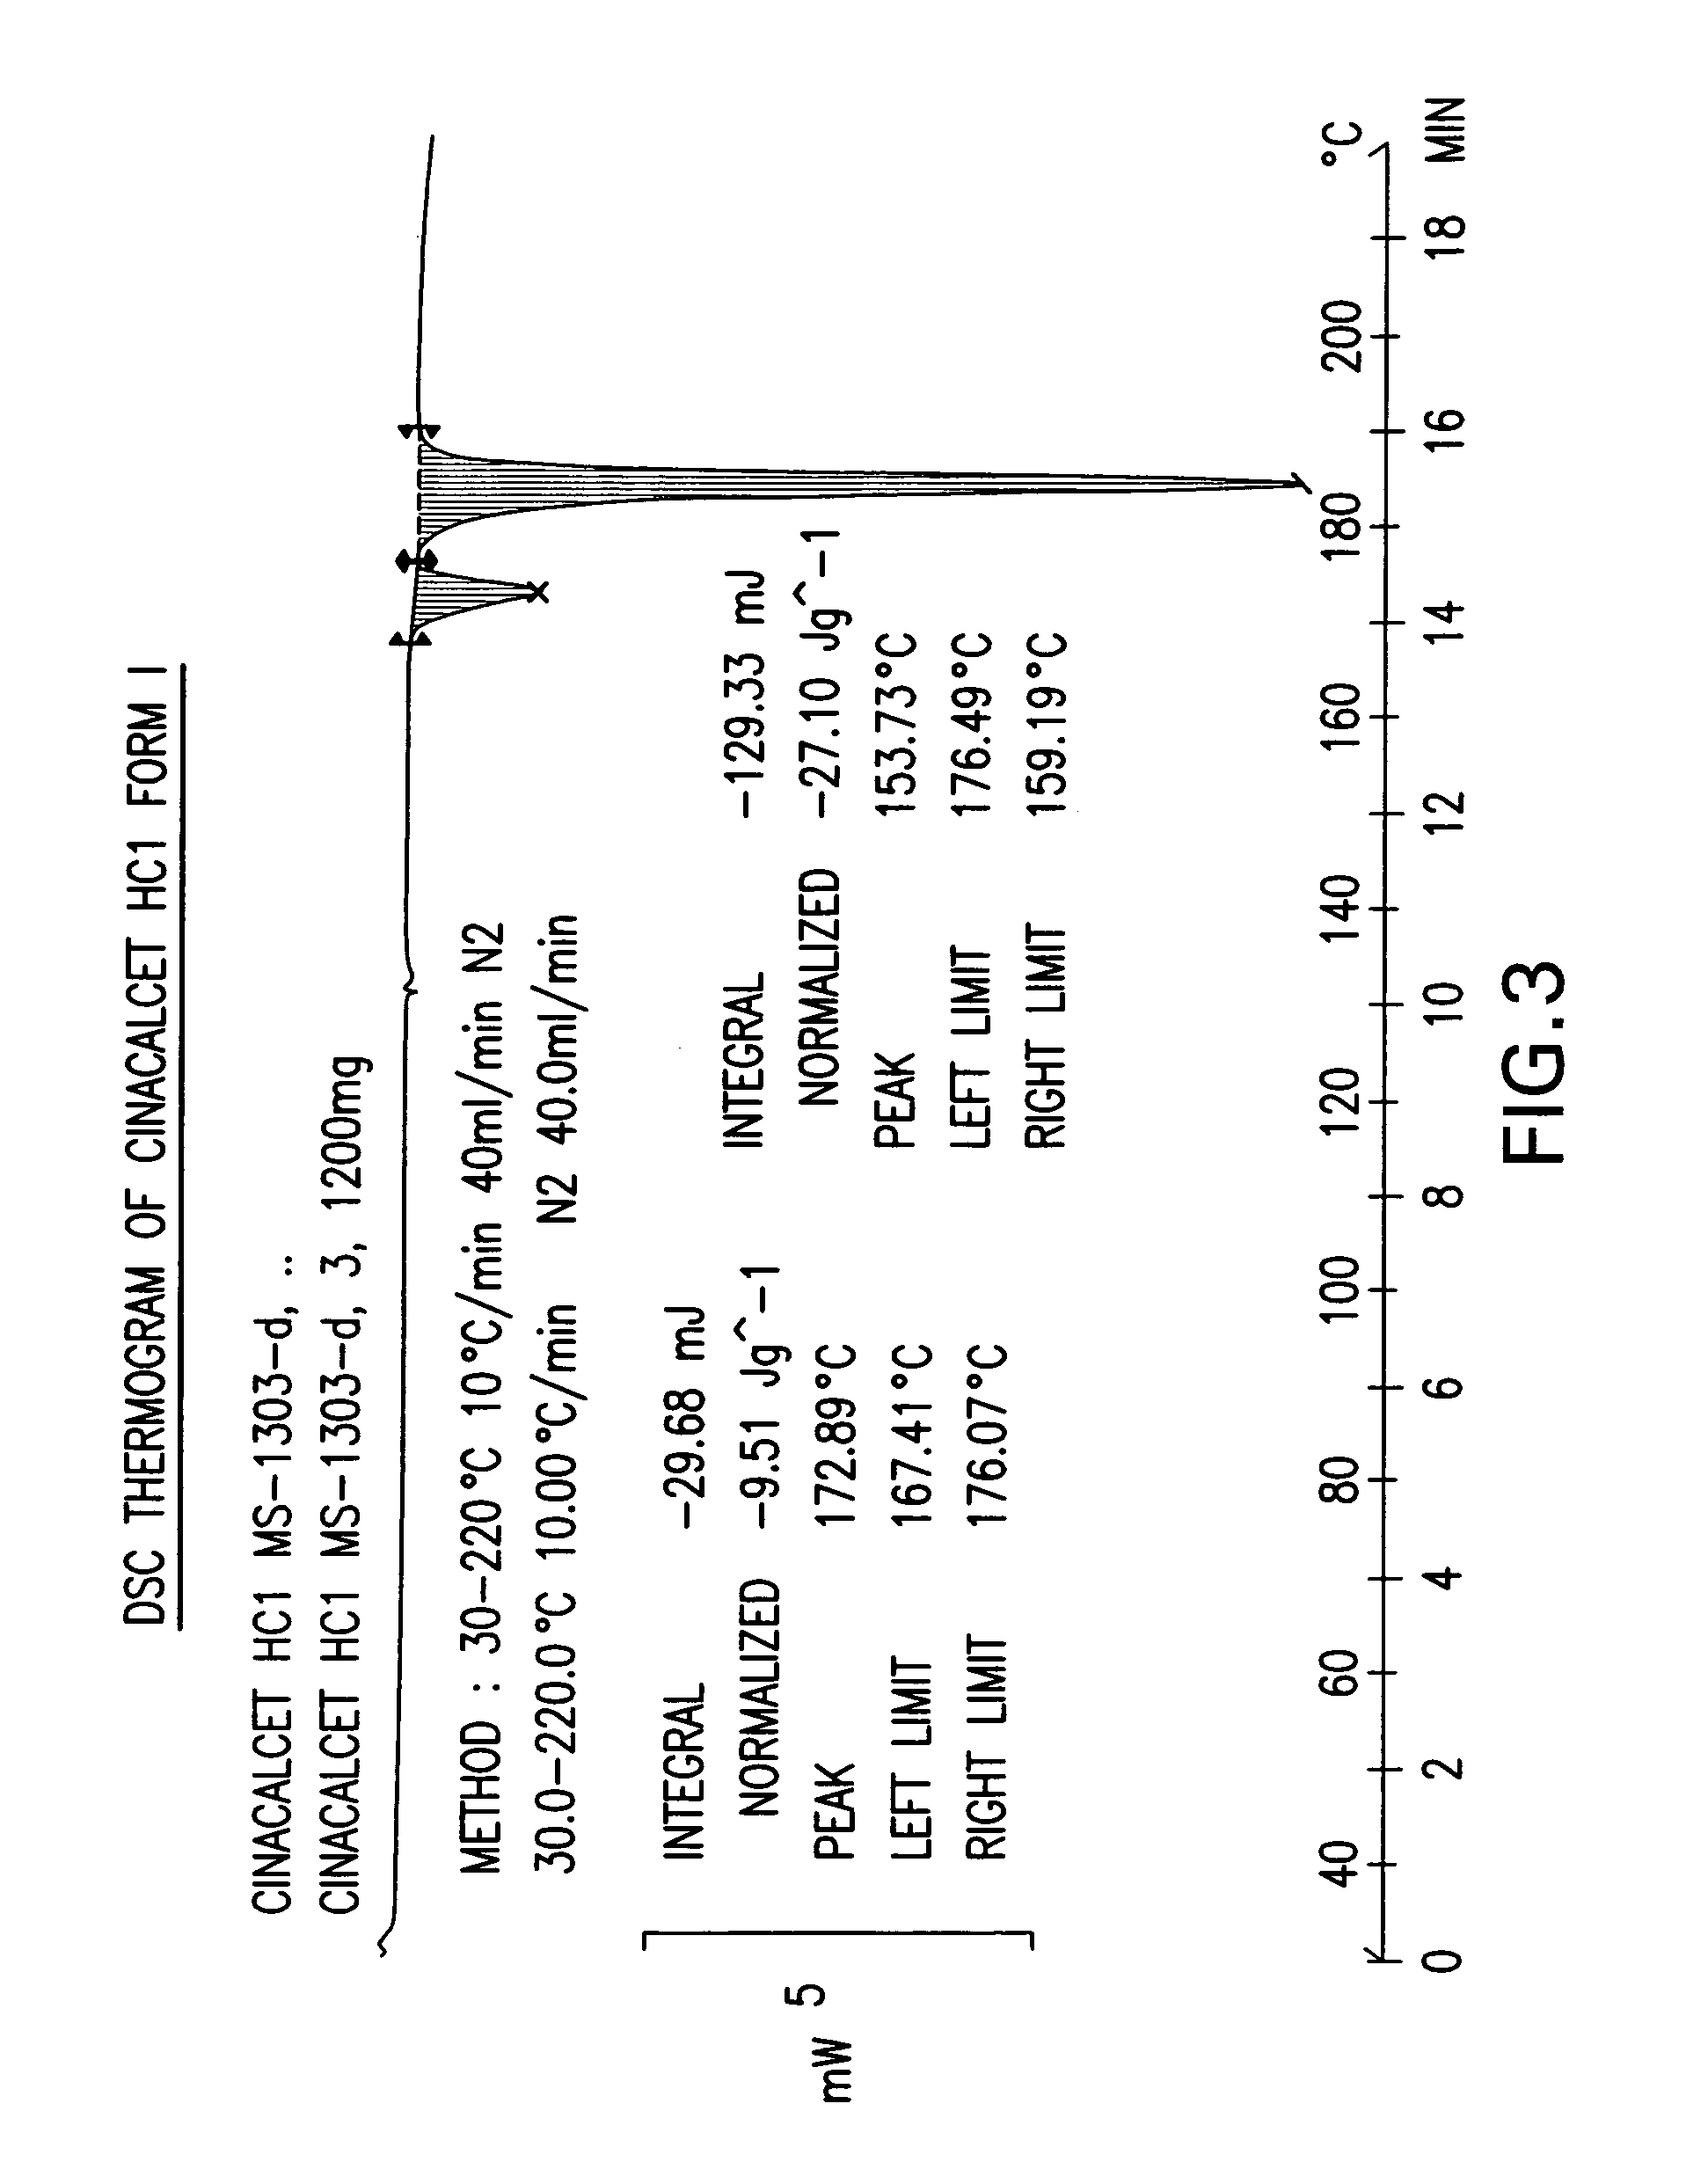 Amorphous cinacalcet hydrochloride and preparation thereof